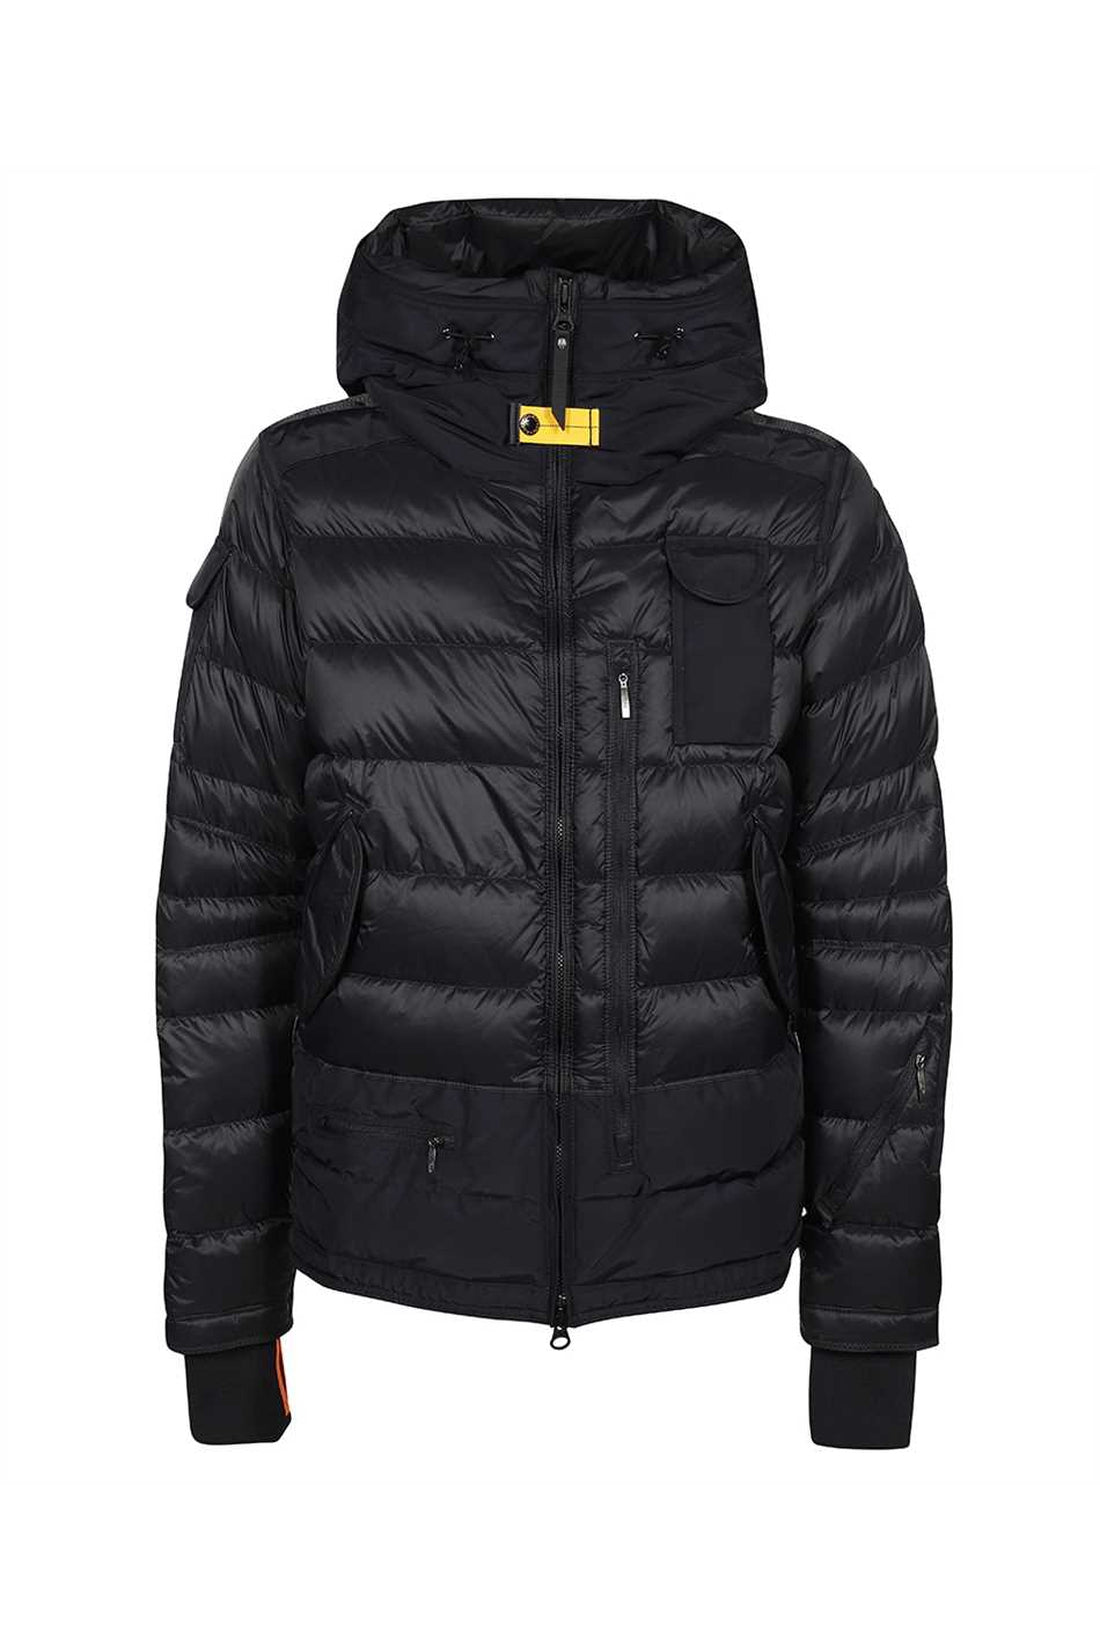 Parajumpers-OUTLET-SALE-Hooded down jacket-ARCHIVIST